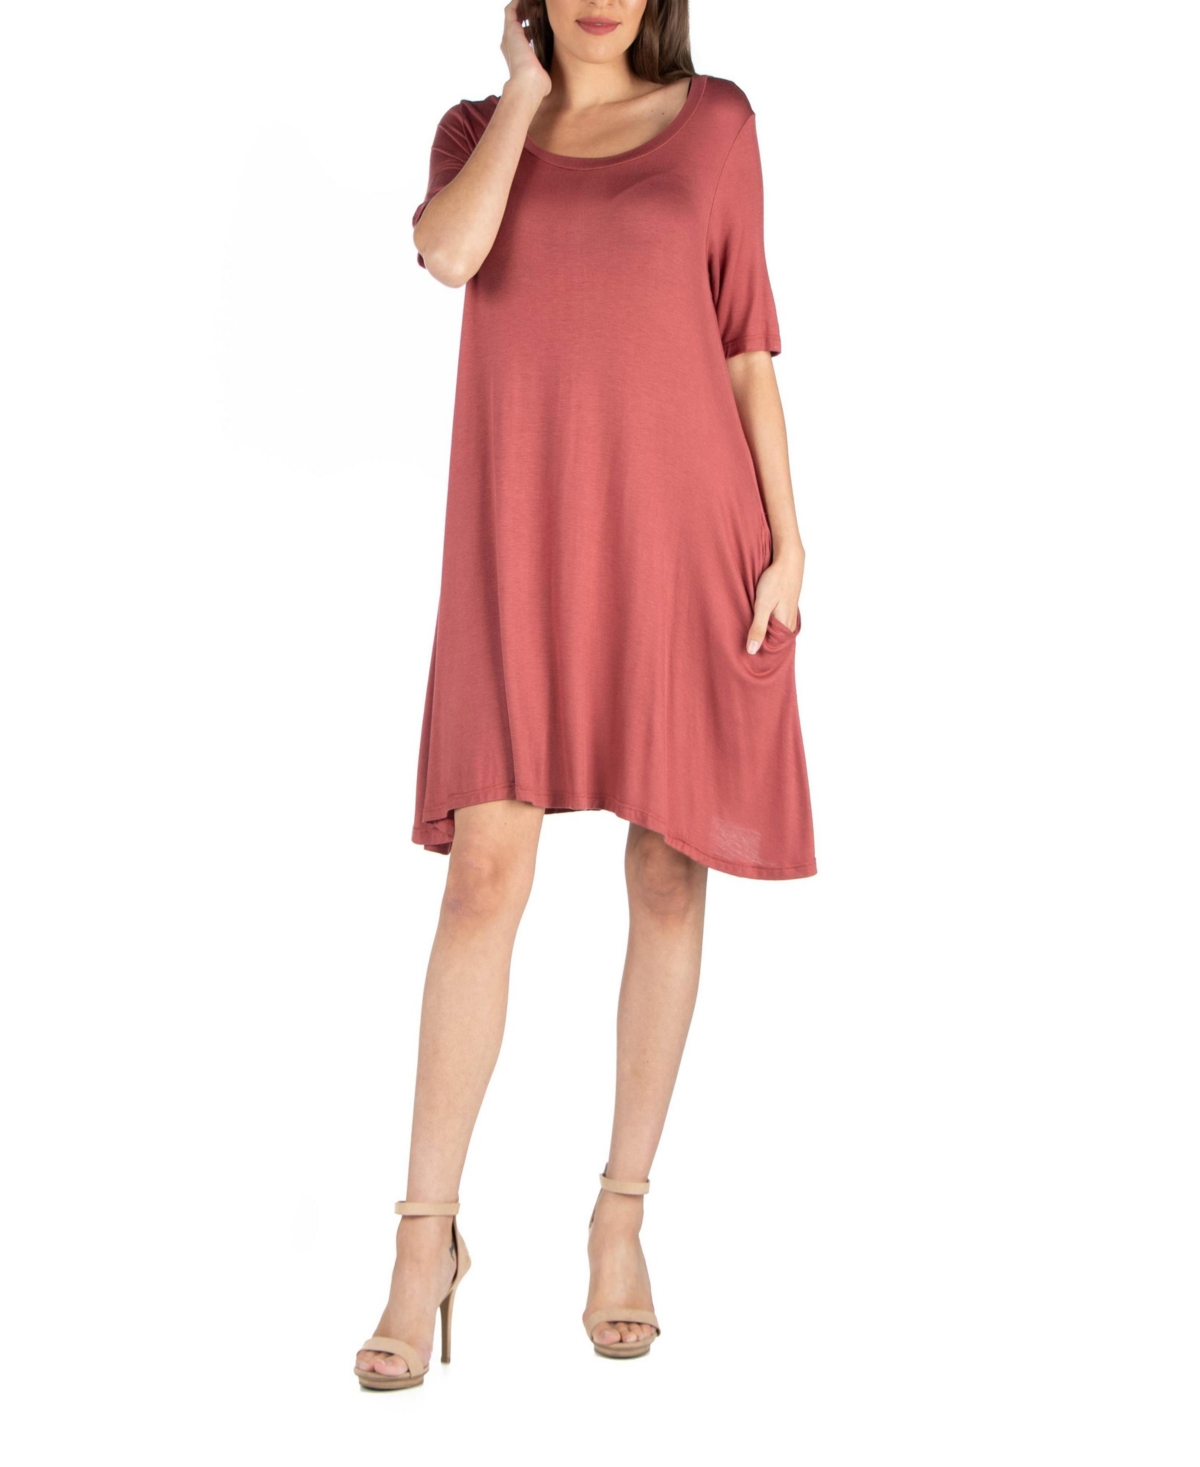 Soft Flare T-Shirt Dress with Pocket Detail - Cinnamon